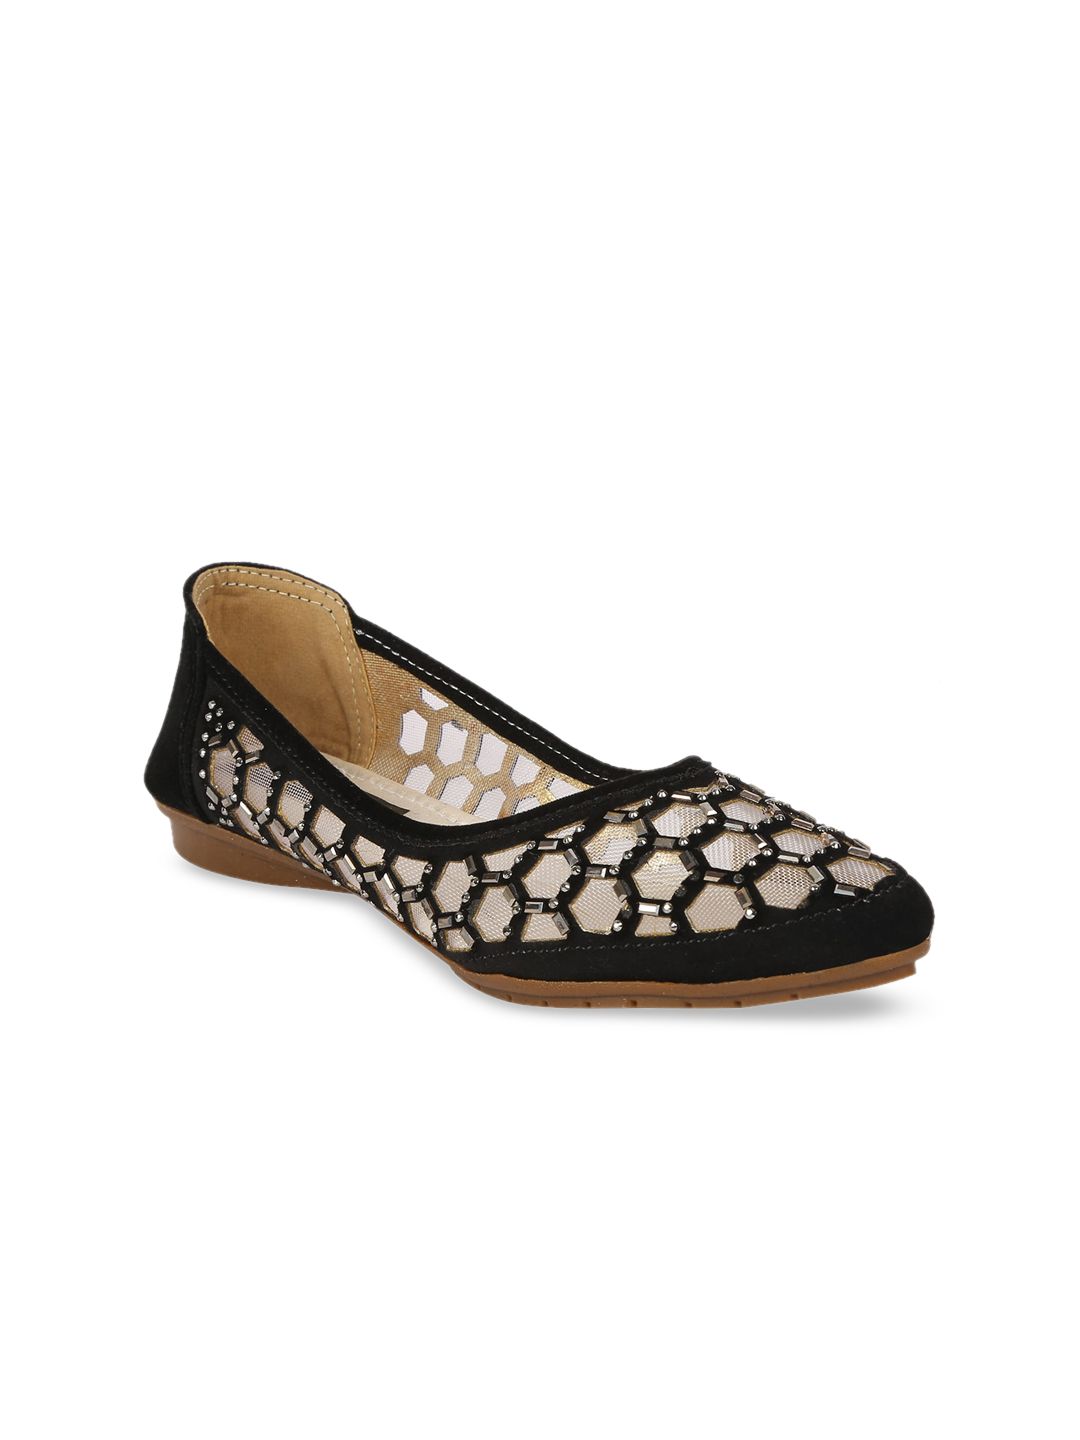 WOMENS BERRY Women Black Printed Embellished Leather Sustainable Ballerinas Flats Price in India